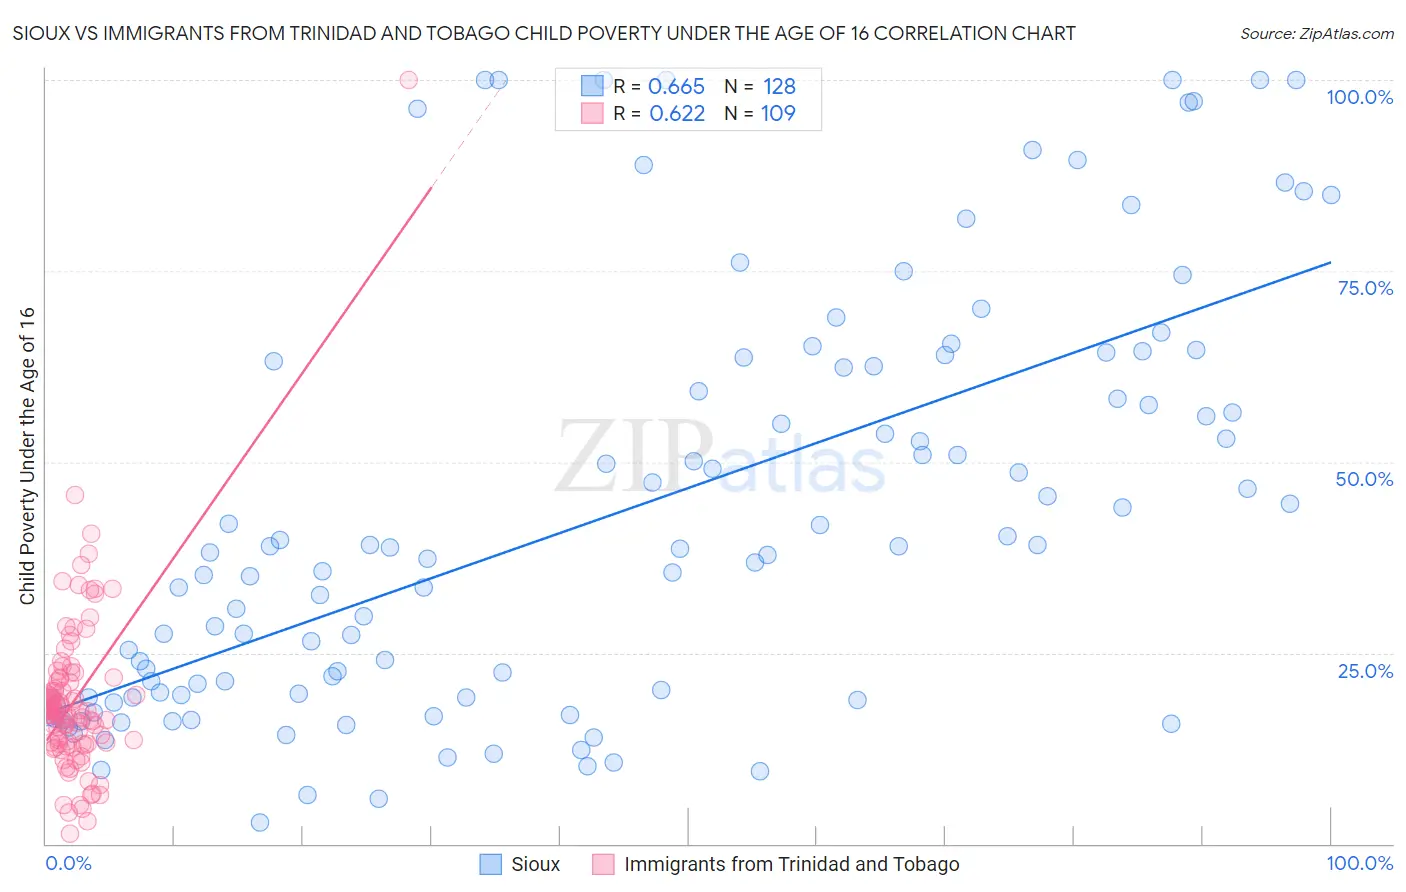 Sioux vs Immigrants from Trinidad and Tobago Child Poverty Under the Age of 16